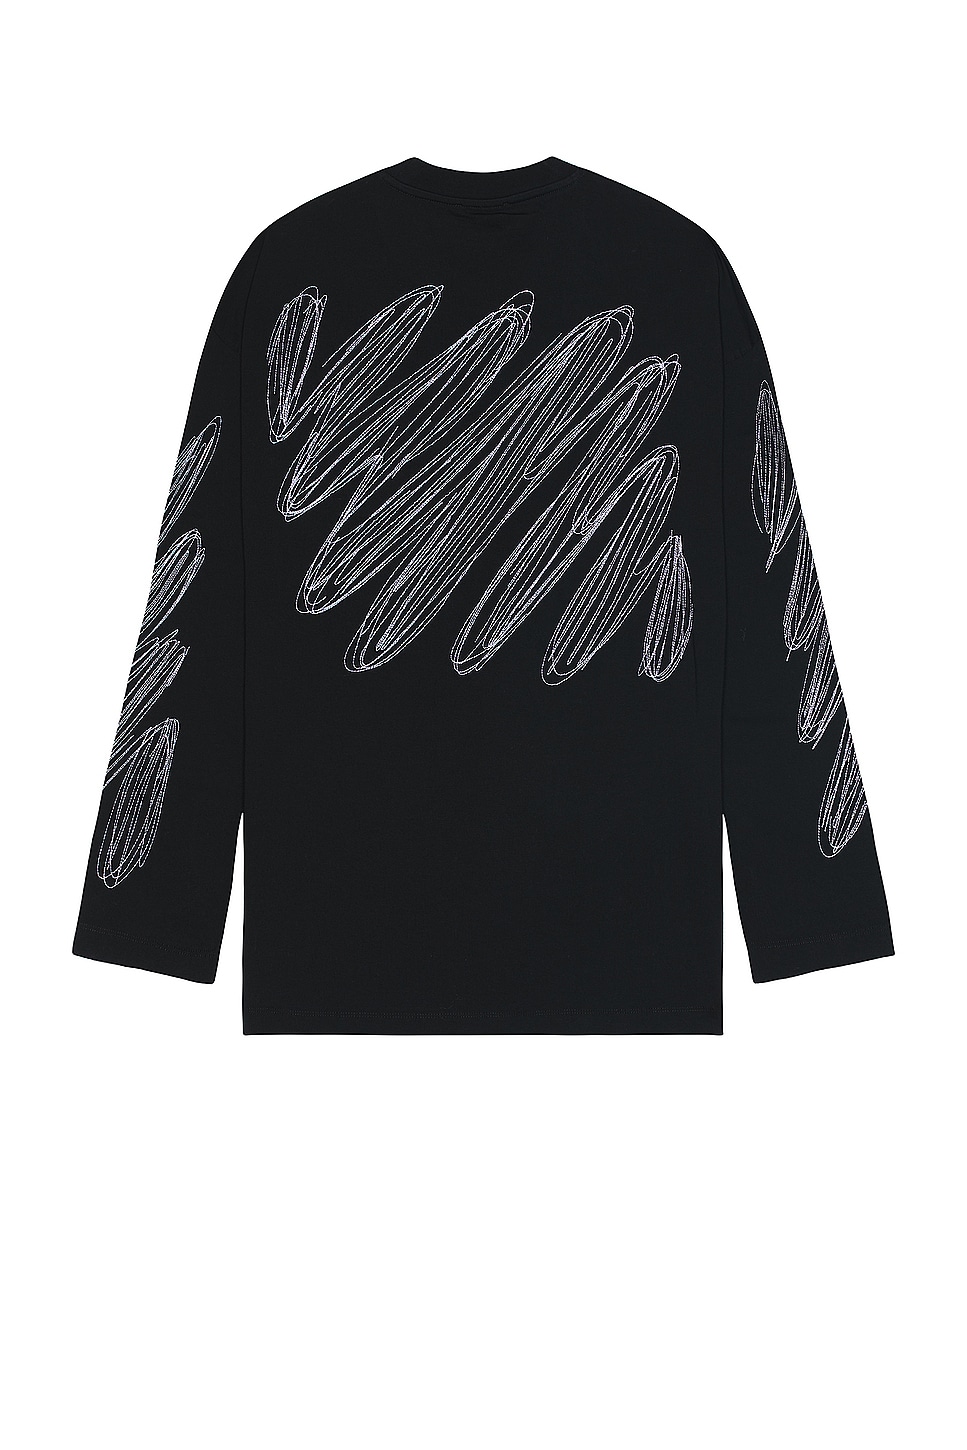 Image 1 of OFF-WHITE Scribble Diag Wide Long Sleeve T-shirt in Black & White